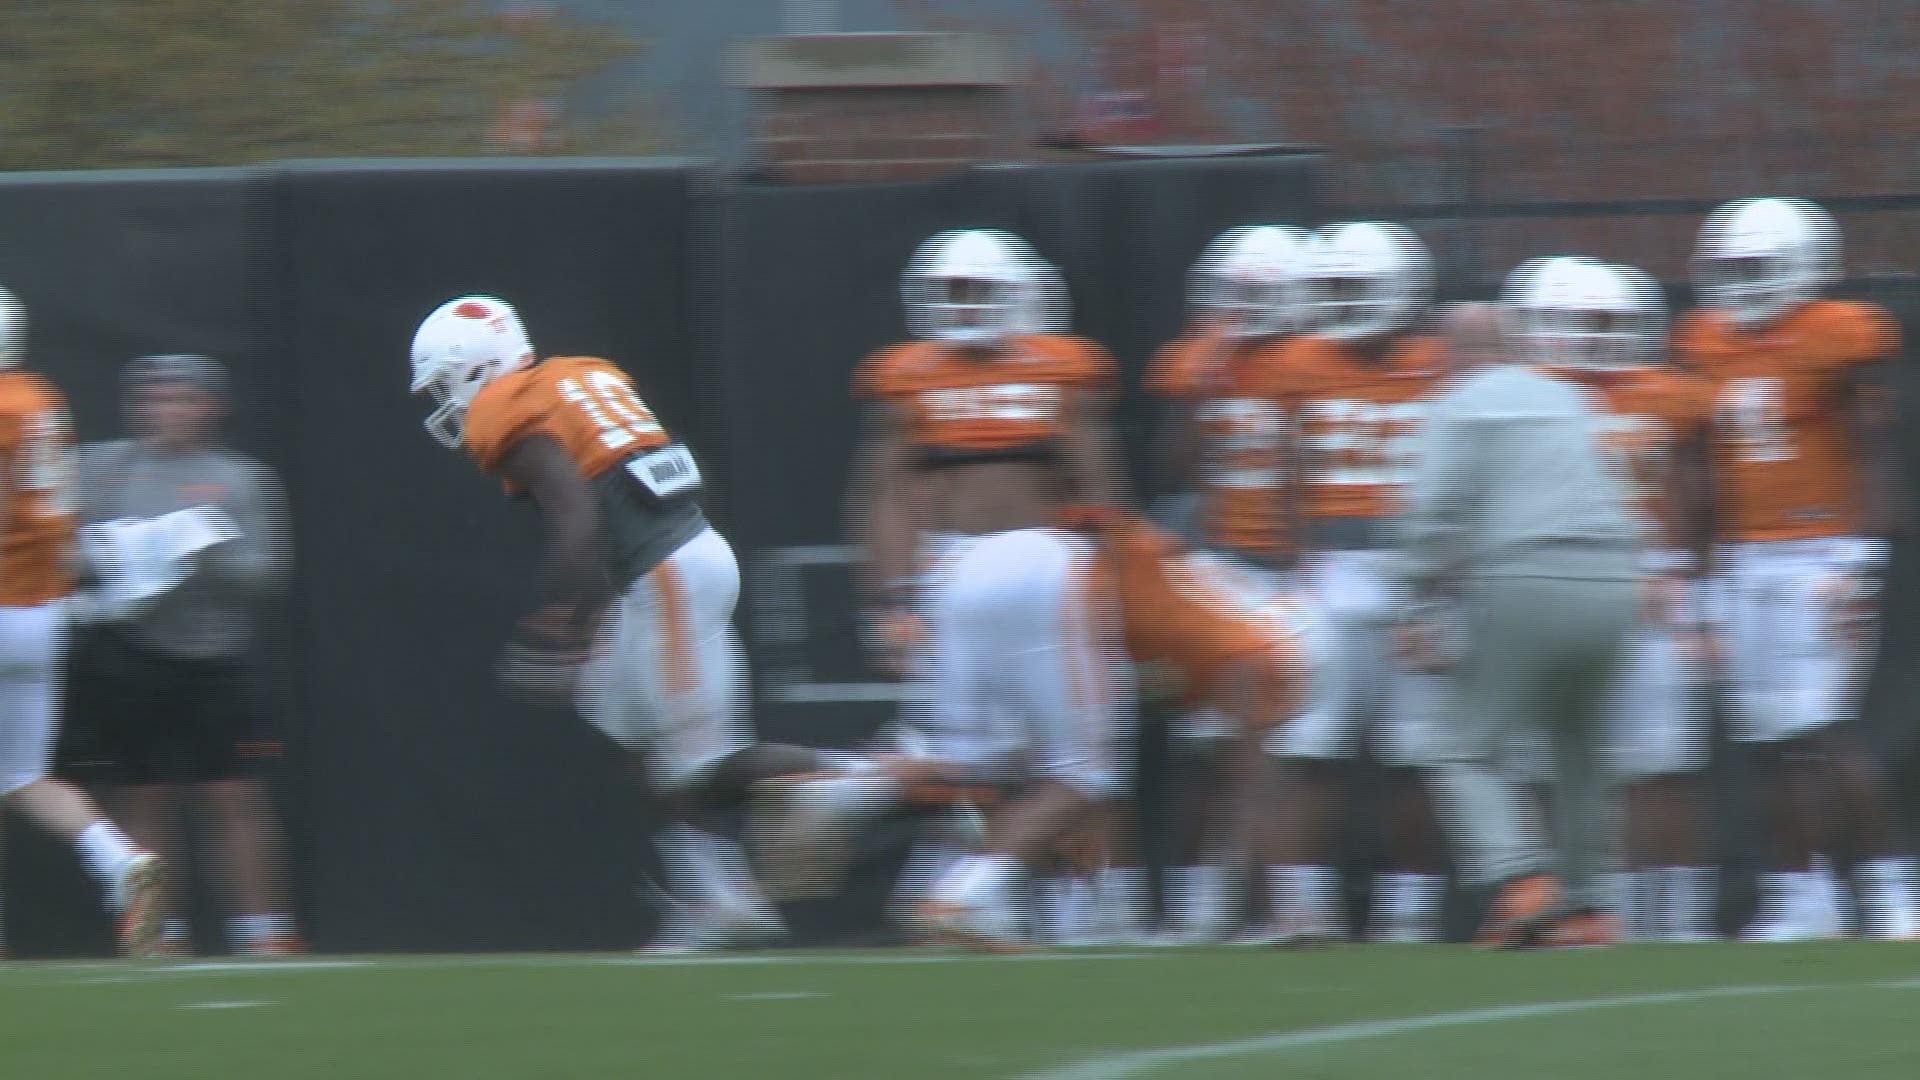 Highlights from day 3 of Tennessee football spring practice